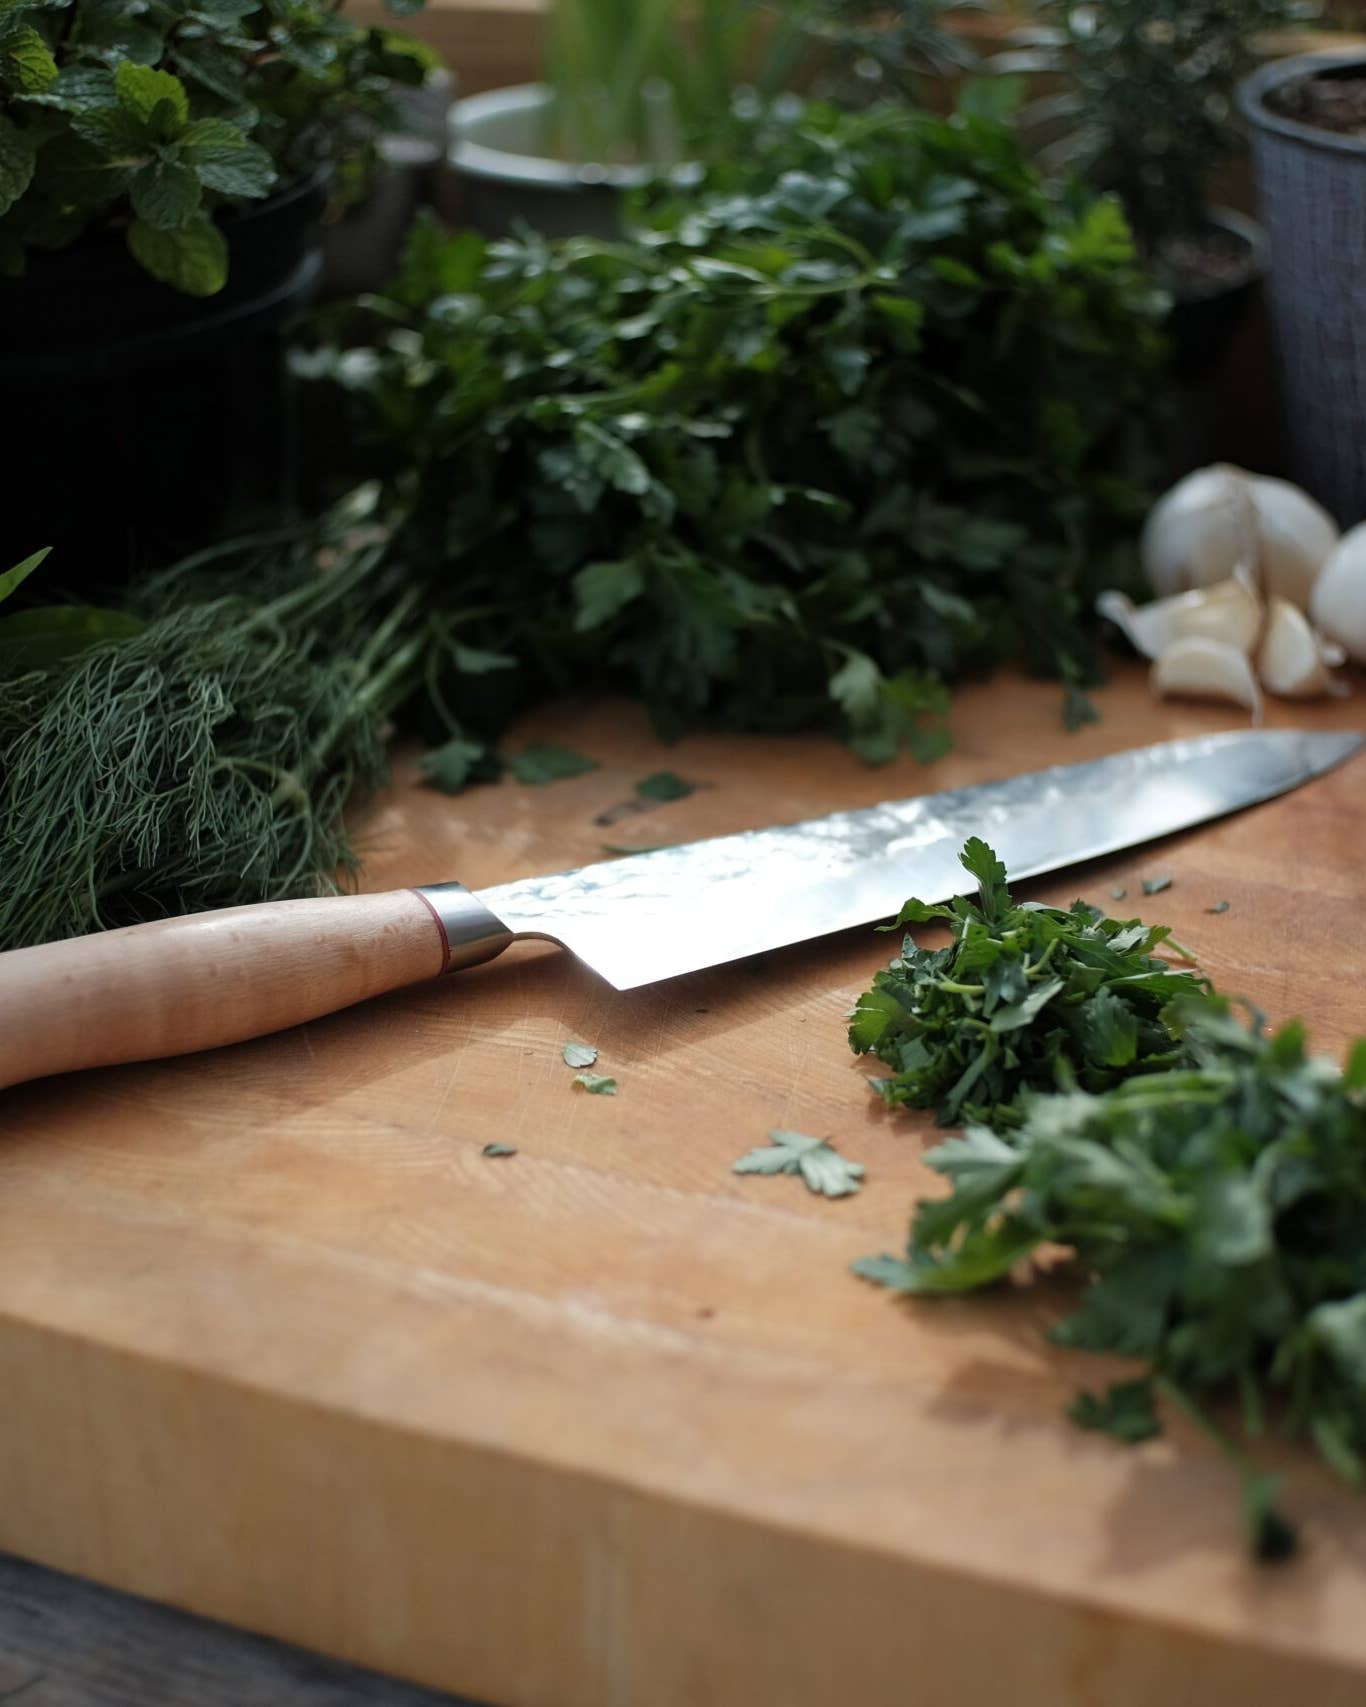 The Next Knife You Buy Should Be a Santoku Knife (+ 9 of Our Favorite Picks)